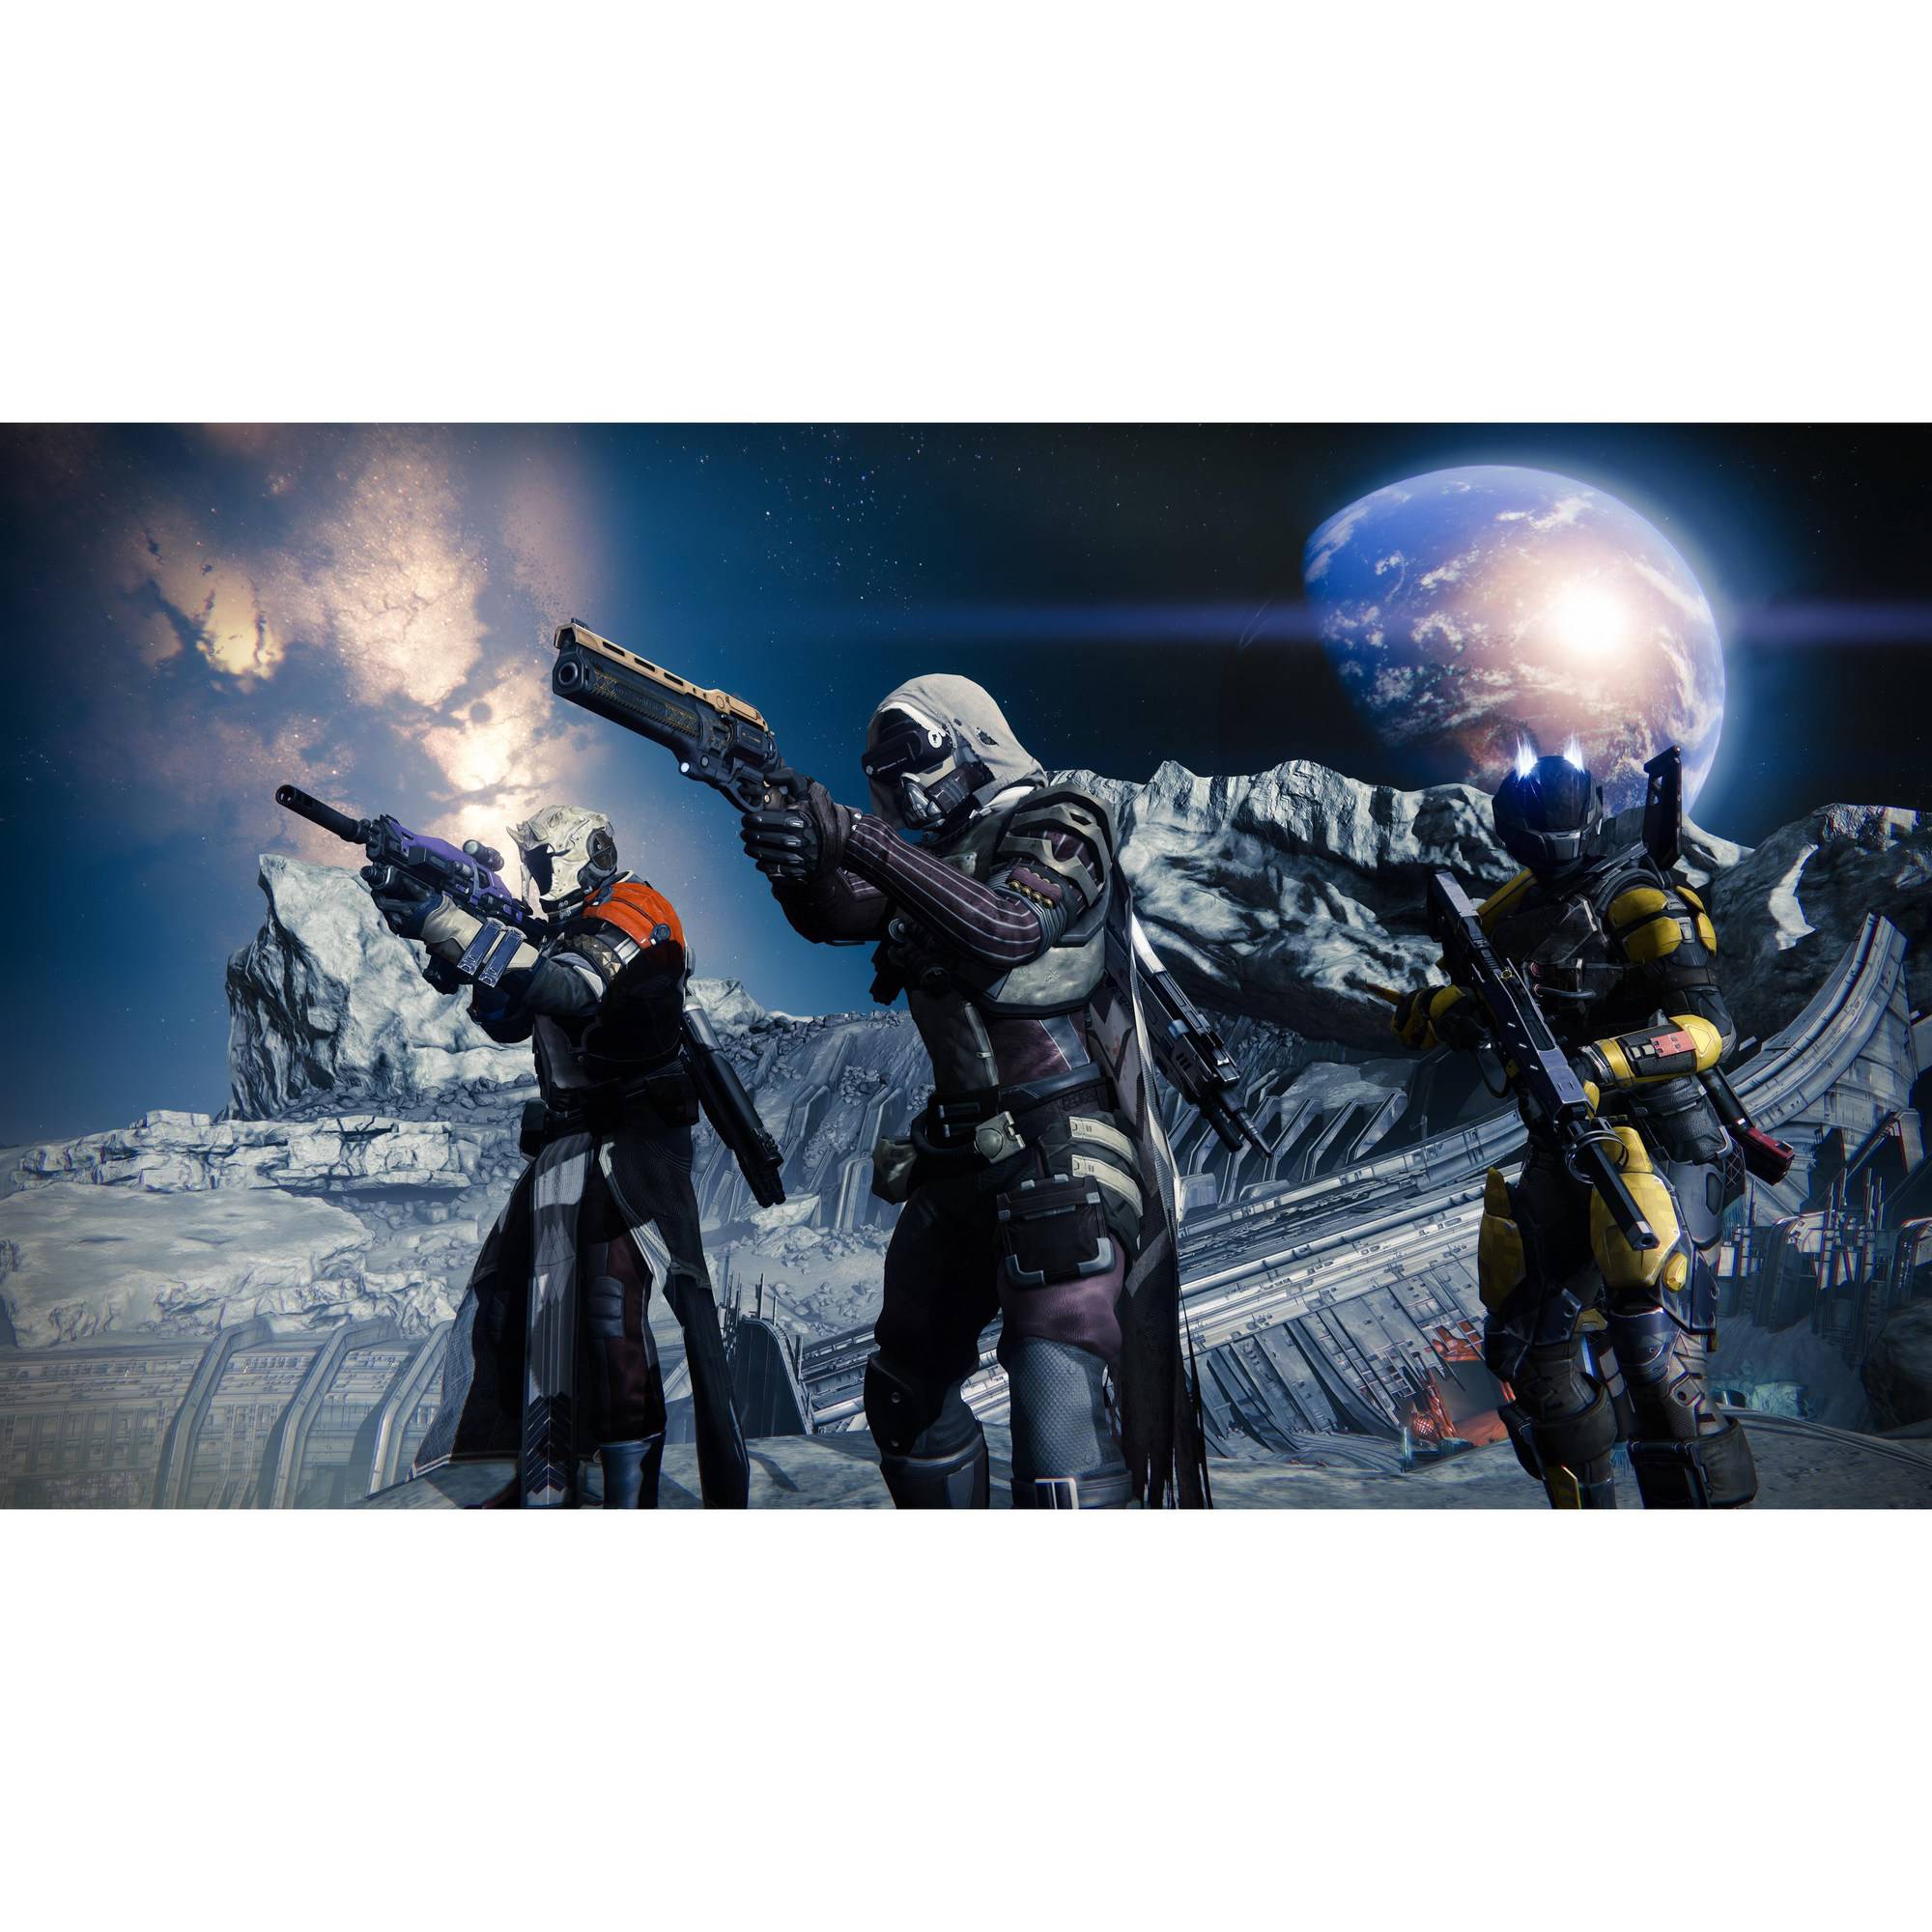 Destiny: The Taken King Legendary Edition, Activision, PlayStation 4, 047875874428 - image 13 of 31